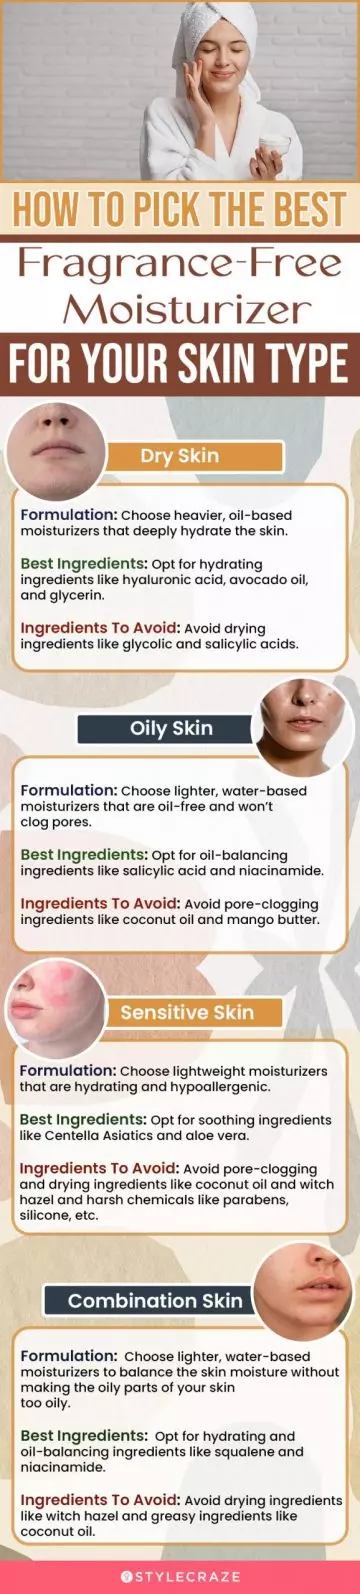 How To Pick The Best Fragrance-Free Moisturizer For Your Skin Type (infographic)